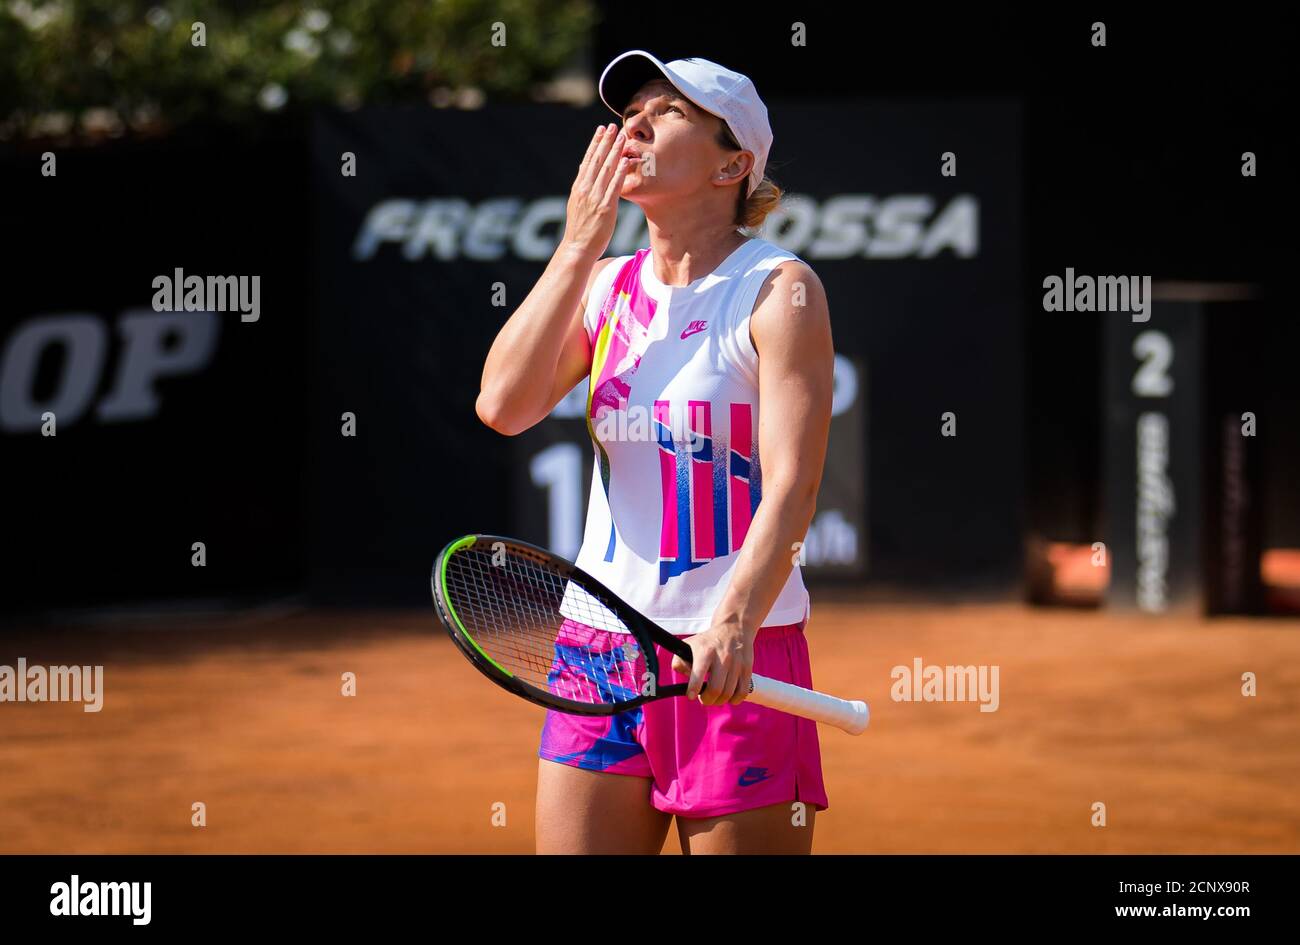 Rome, Italy. 18th Sept, 2020. Simona Halep of Romania in action during her  third-round match at the 2020 Internazionali BNL d'Italia WTA Premier 5  tennis tournament on September 18, 2020 at Foro